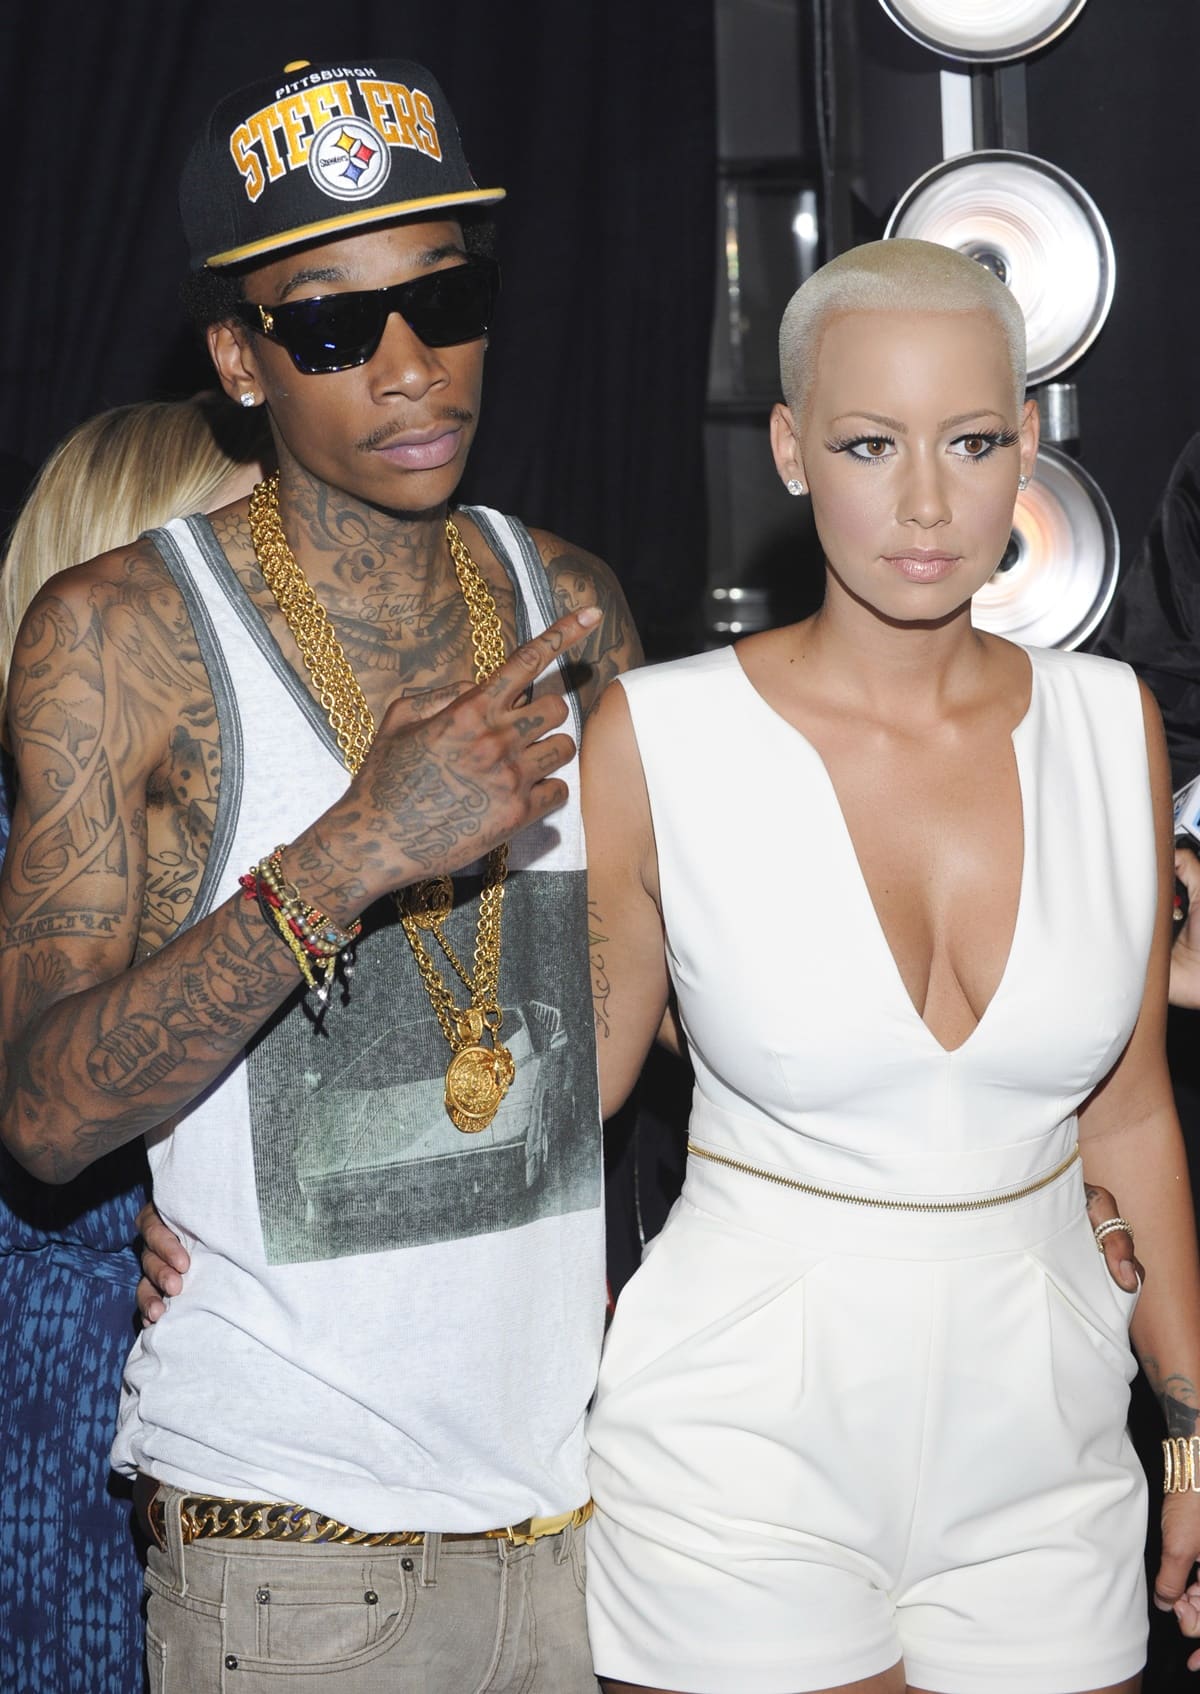 Wiz Khalifa and Amber Rose started dating in 2011 and were married from July 8, 2013 - June 7, 2016